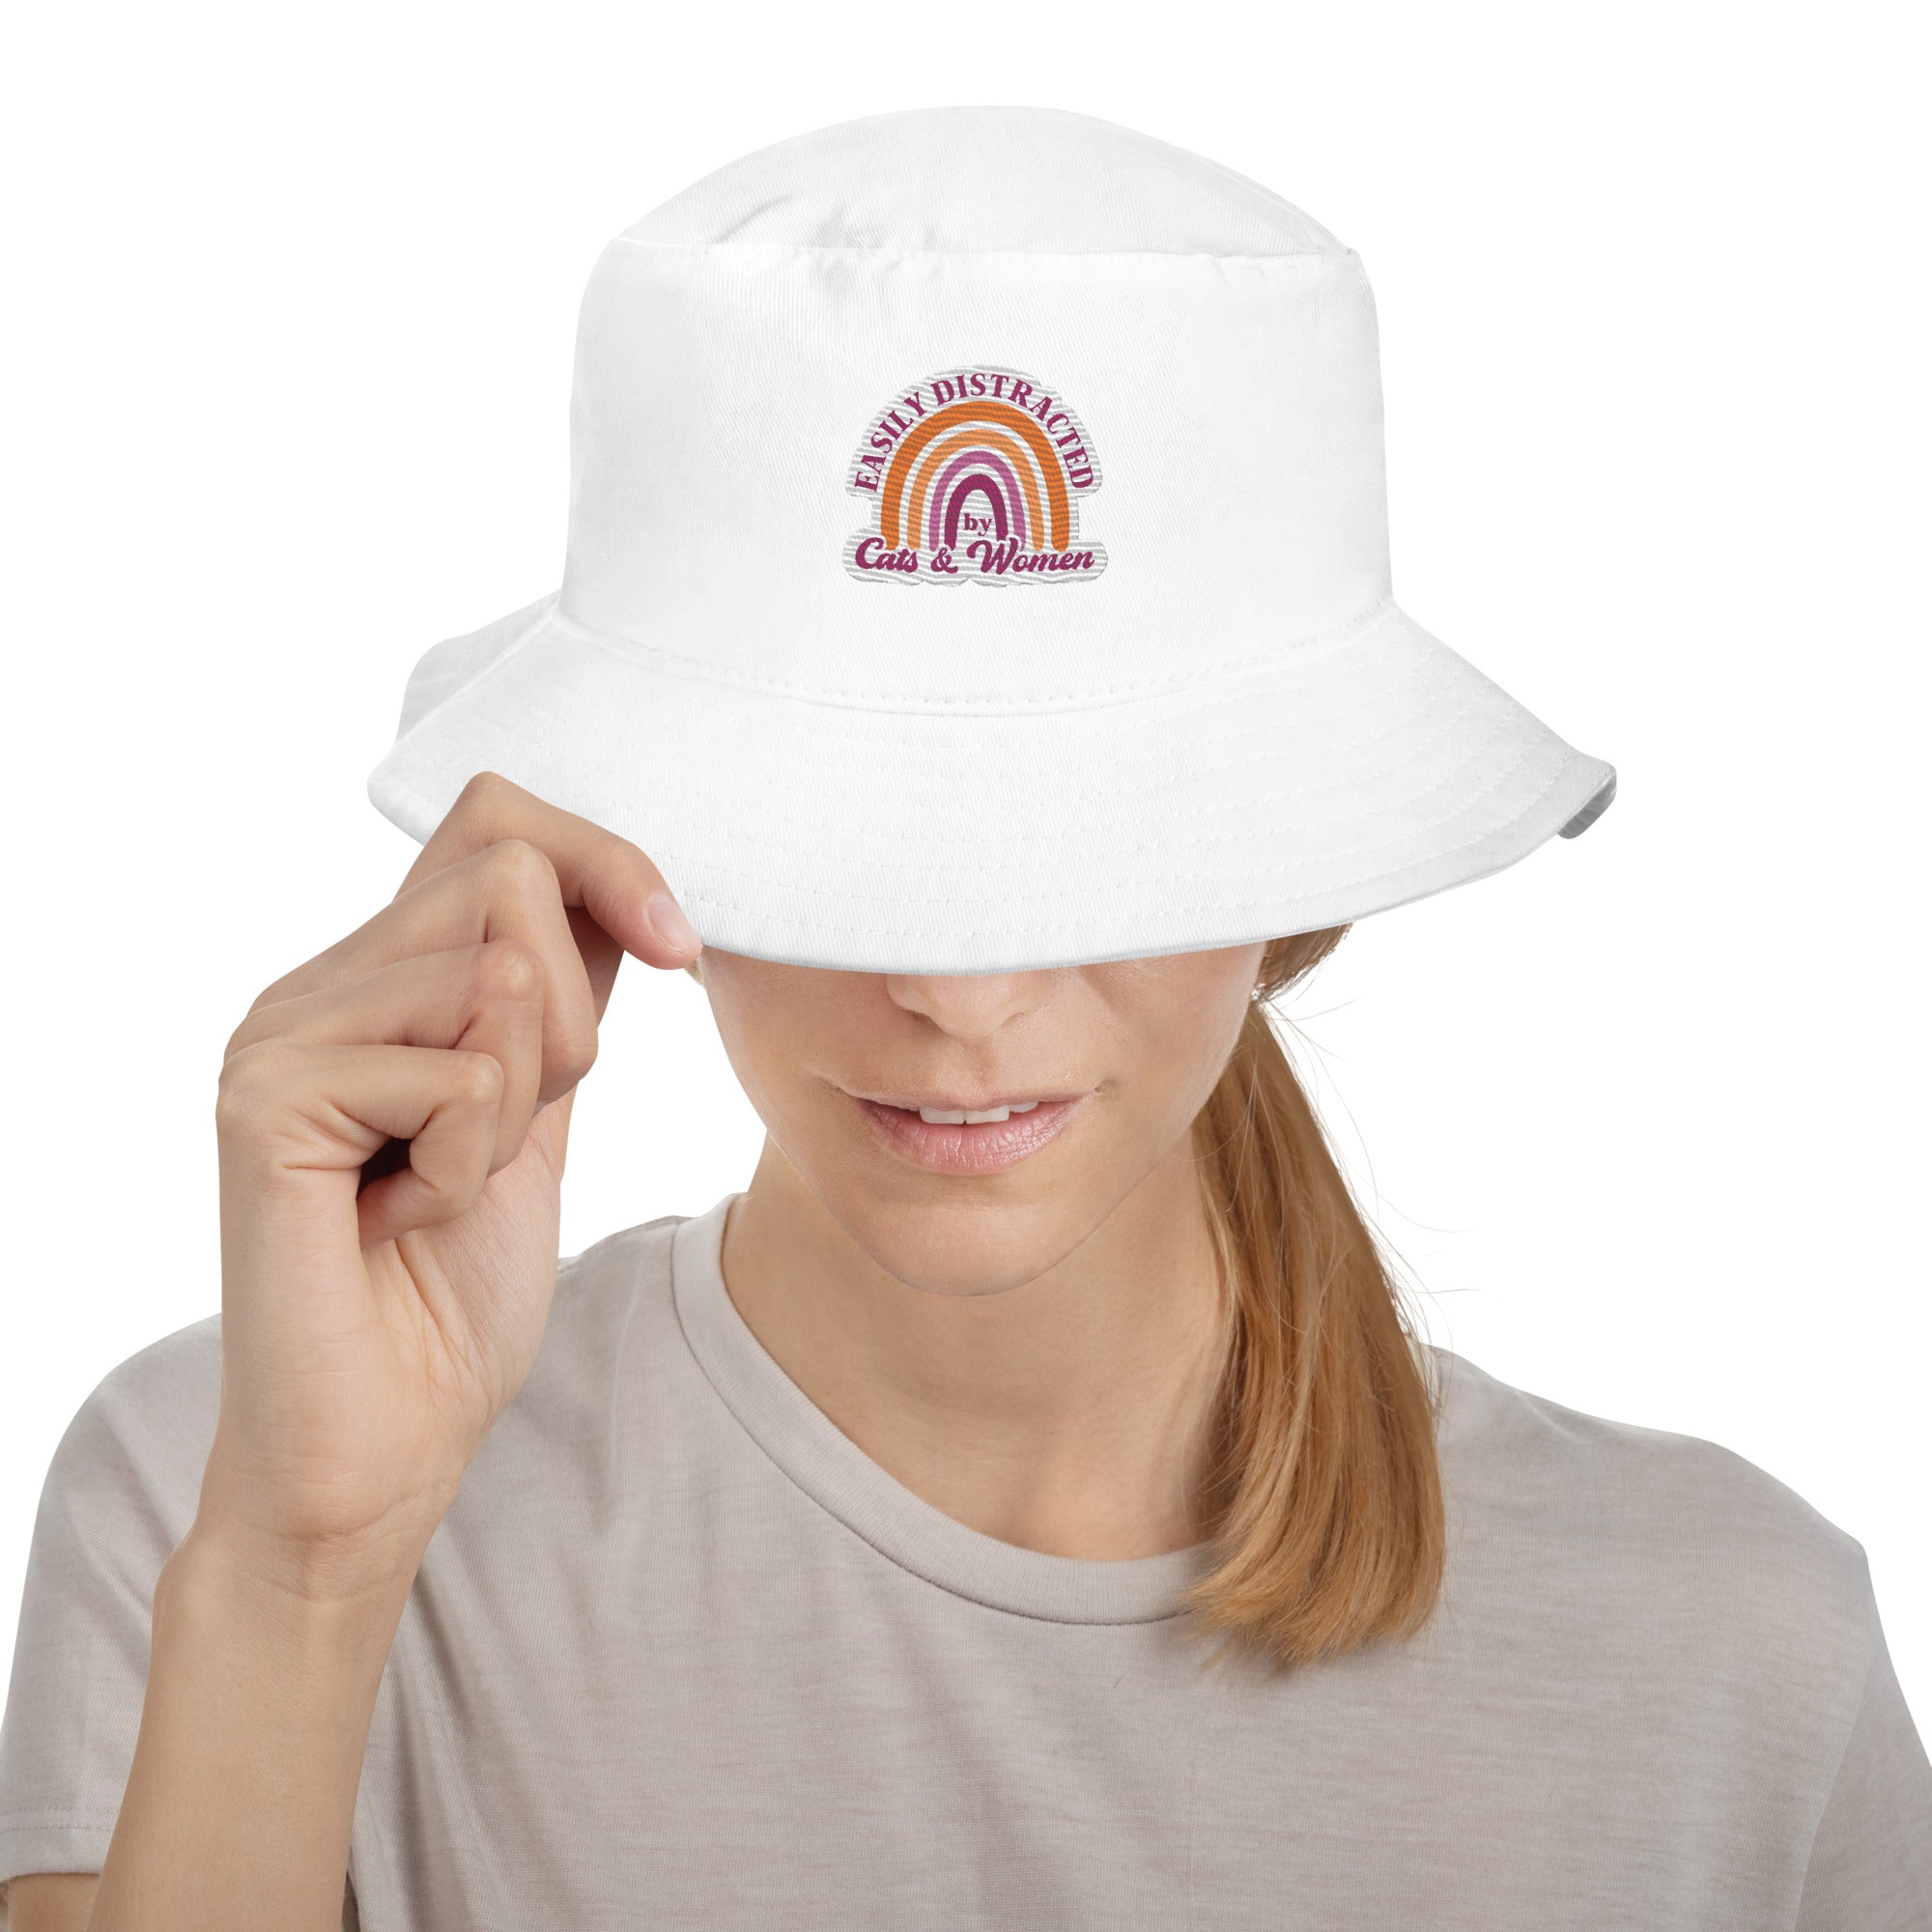 EASILY DISTRACTED by CATS & WOMEN Premium Embriodered Bucket Hat